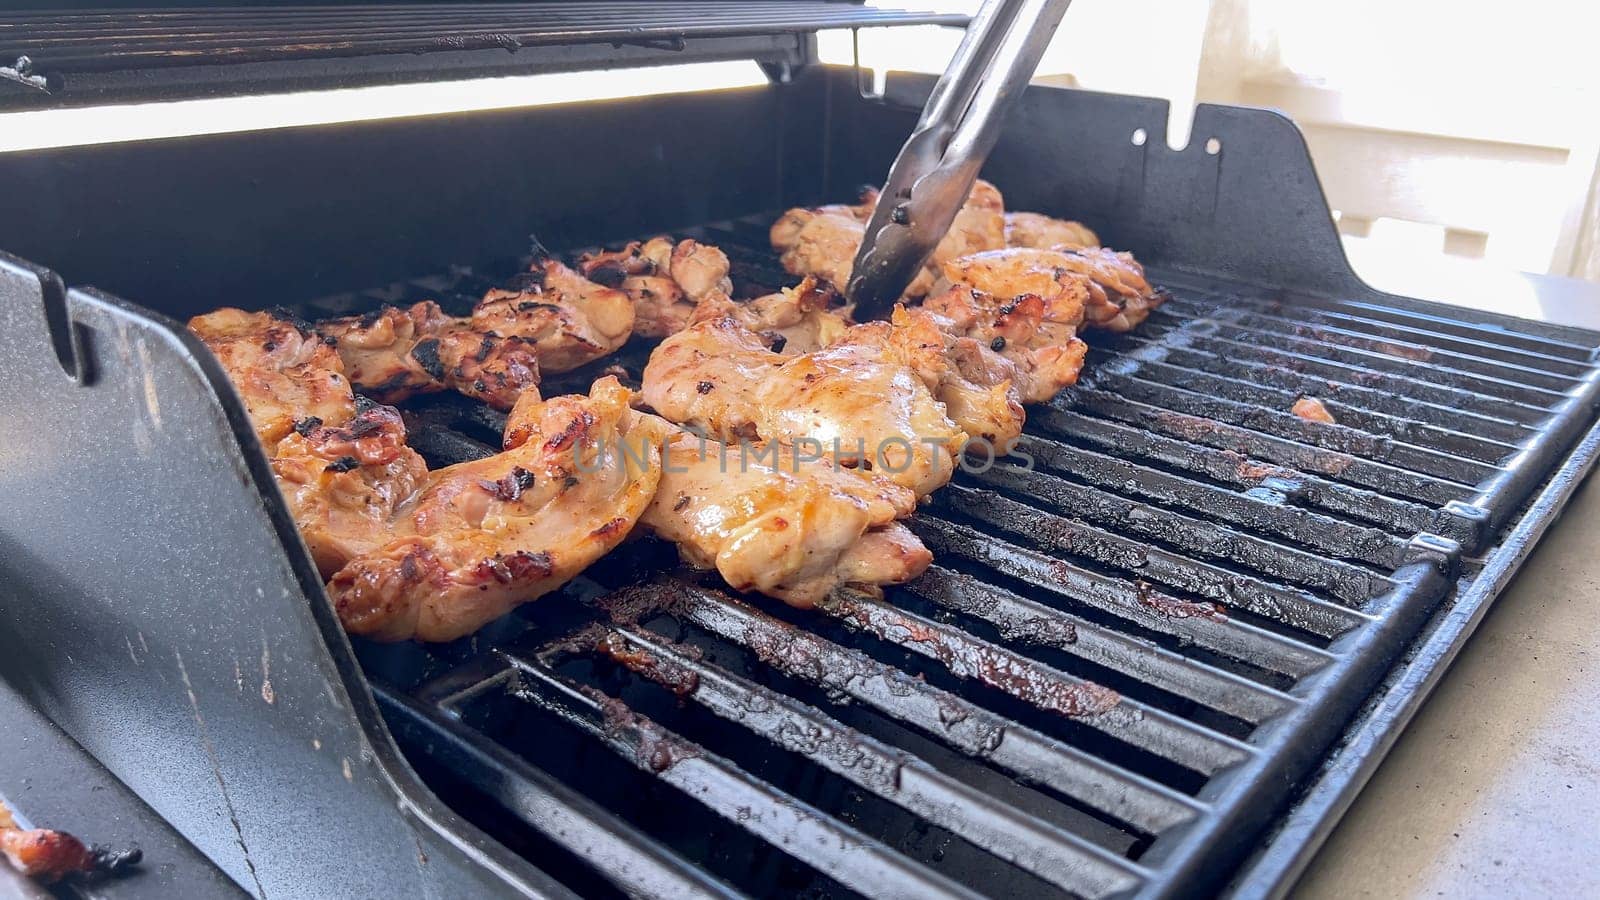 A close-up image capturing the process of grilling marinated chicken pieces, with a person expertly flipping them to ensure even cooking on a classic outdoor barbecue grill.